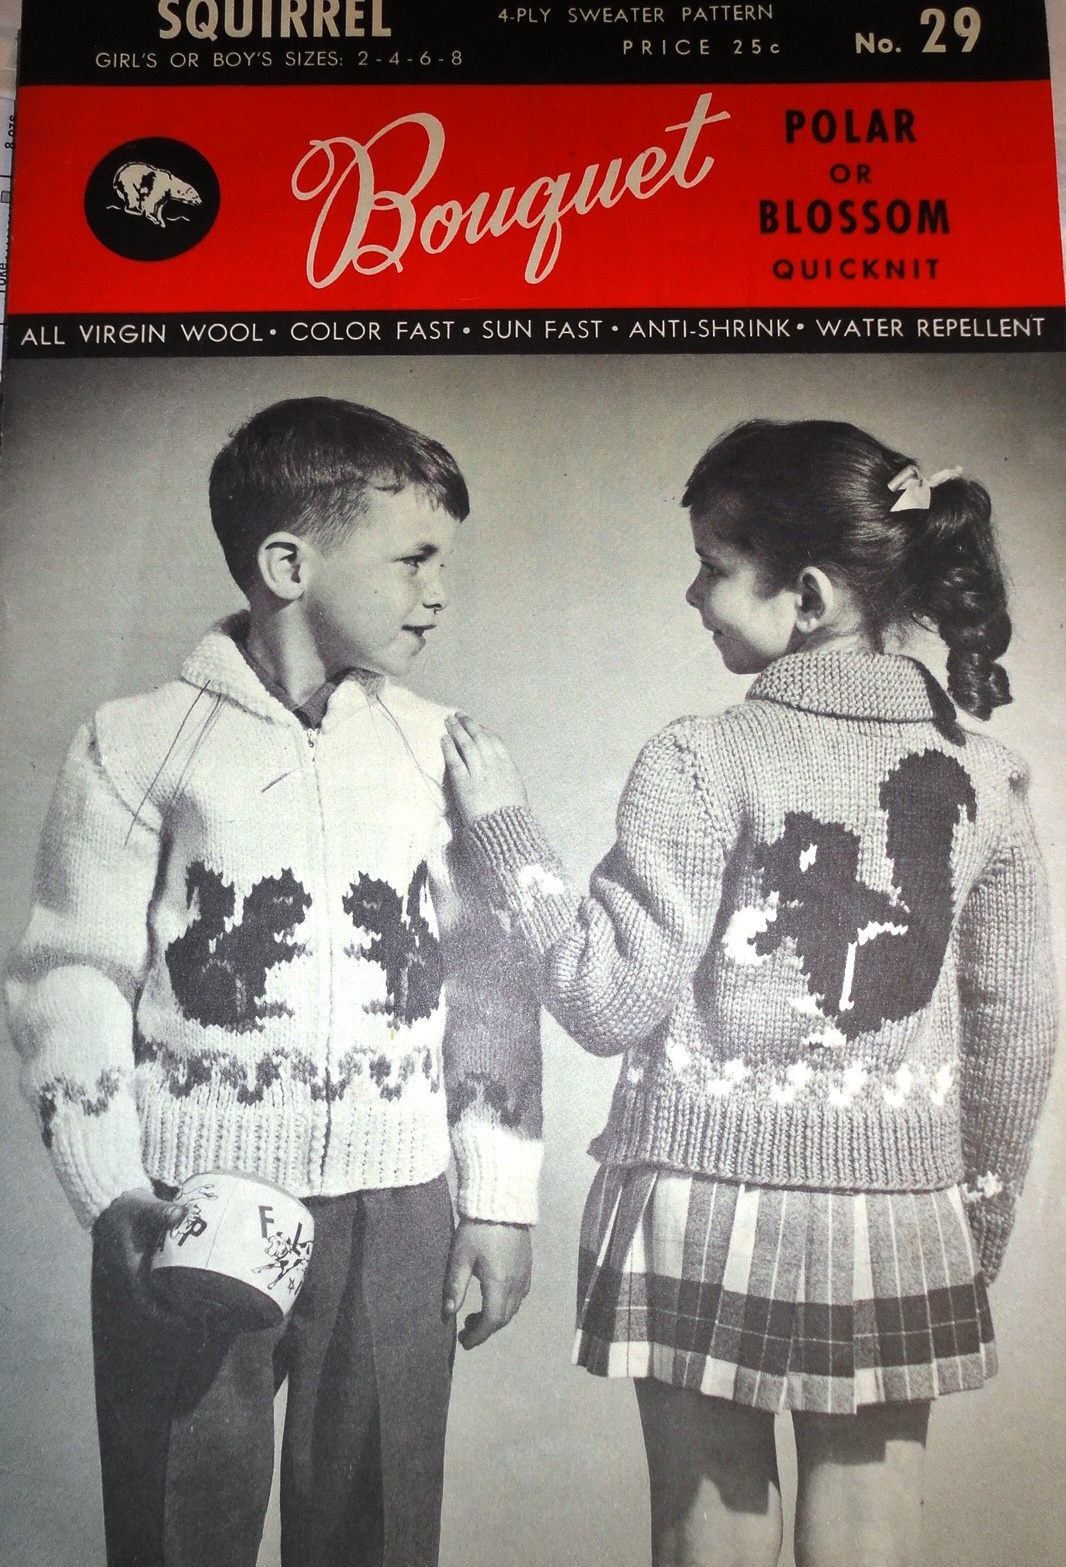 Bouquet 29 Squirrel Child's Sweater Graph-Style Pattern | Knitting ...